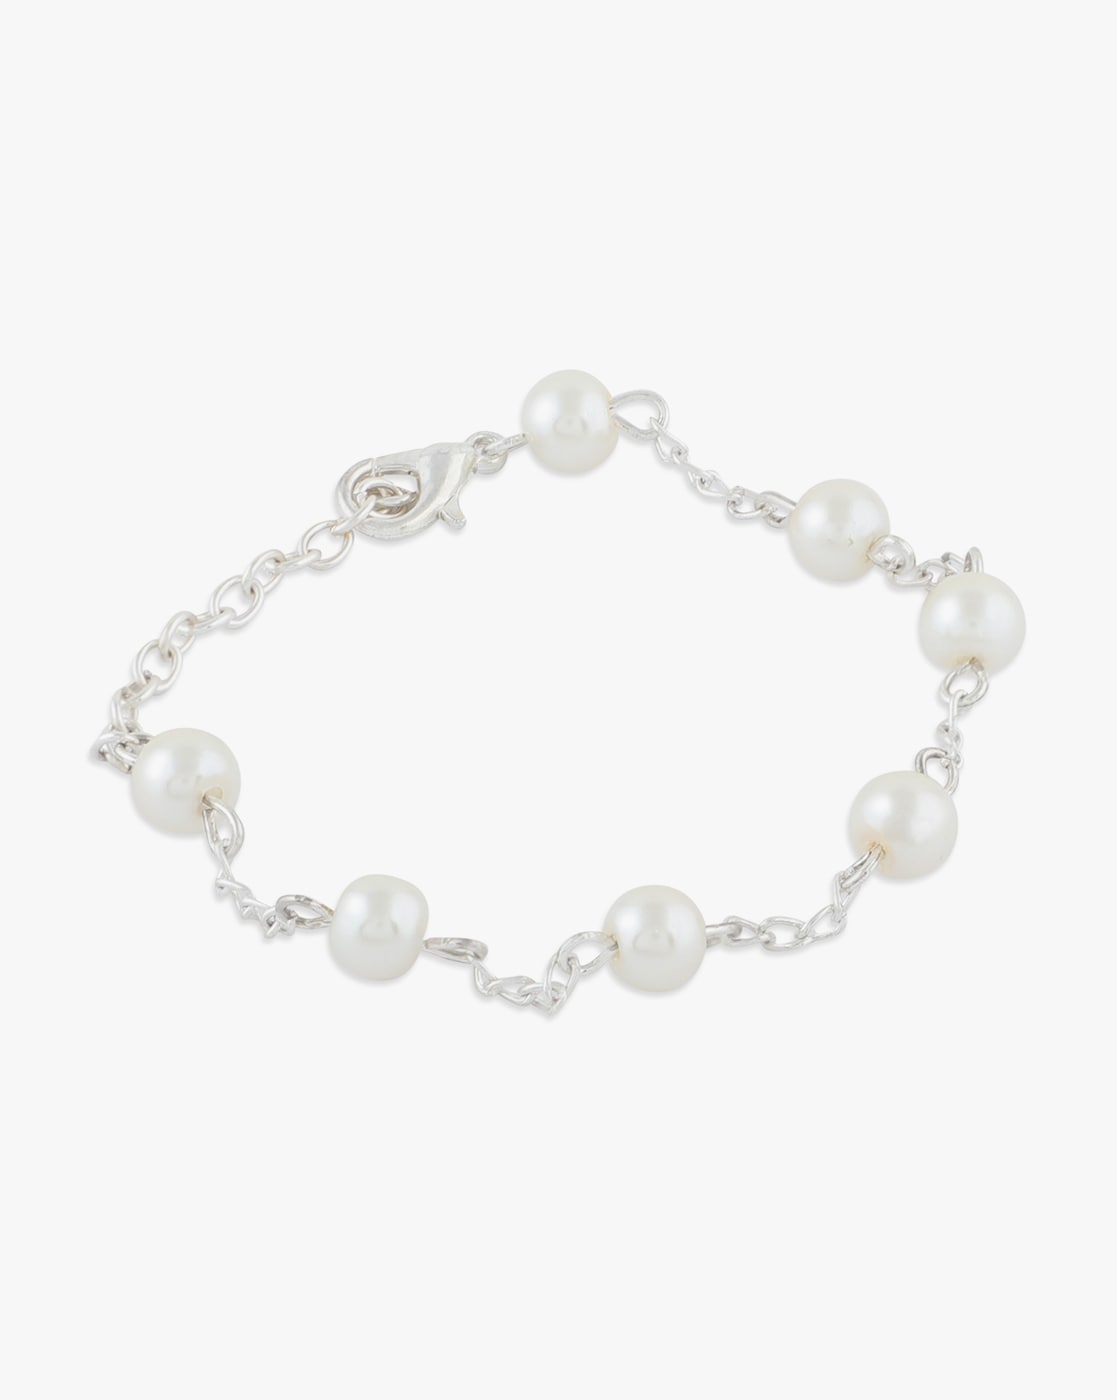 SAN Silver and Freshwater Pearl Bracelet  Ladies from Goodwins Jewellers UK